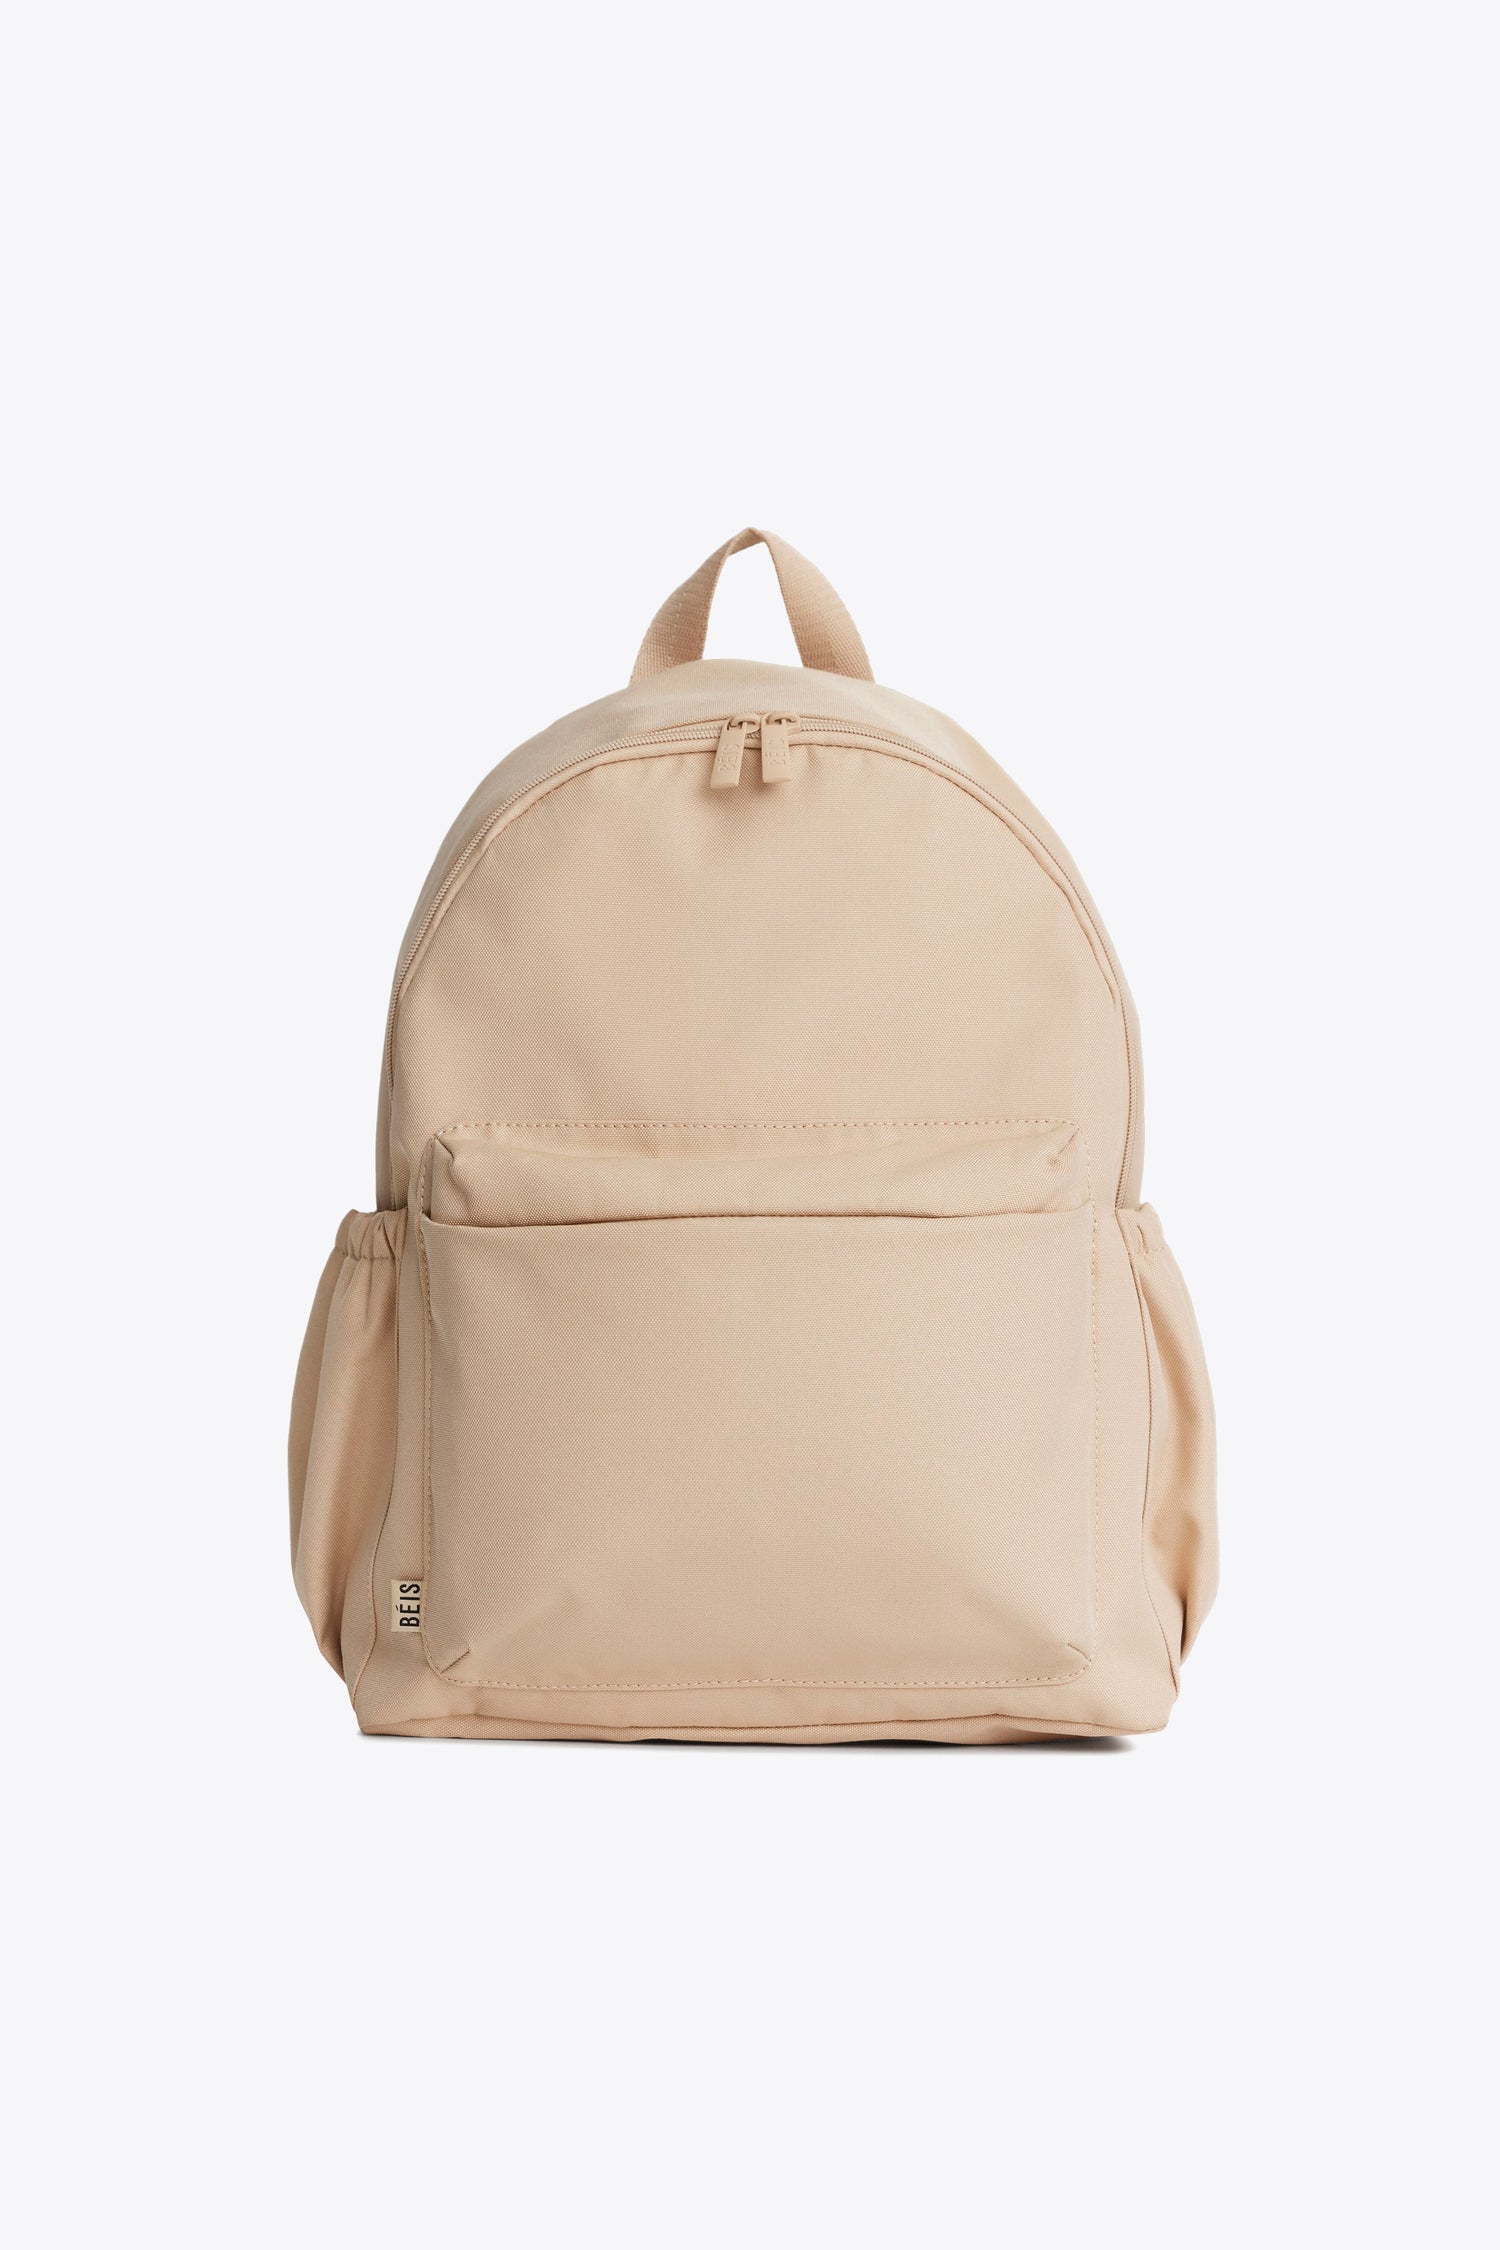 The BÉISics Backpack Colors